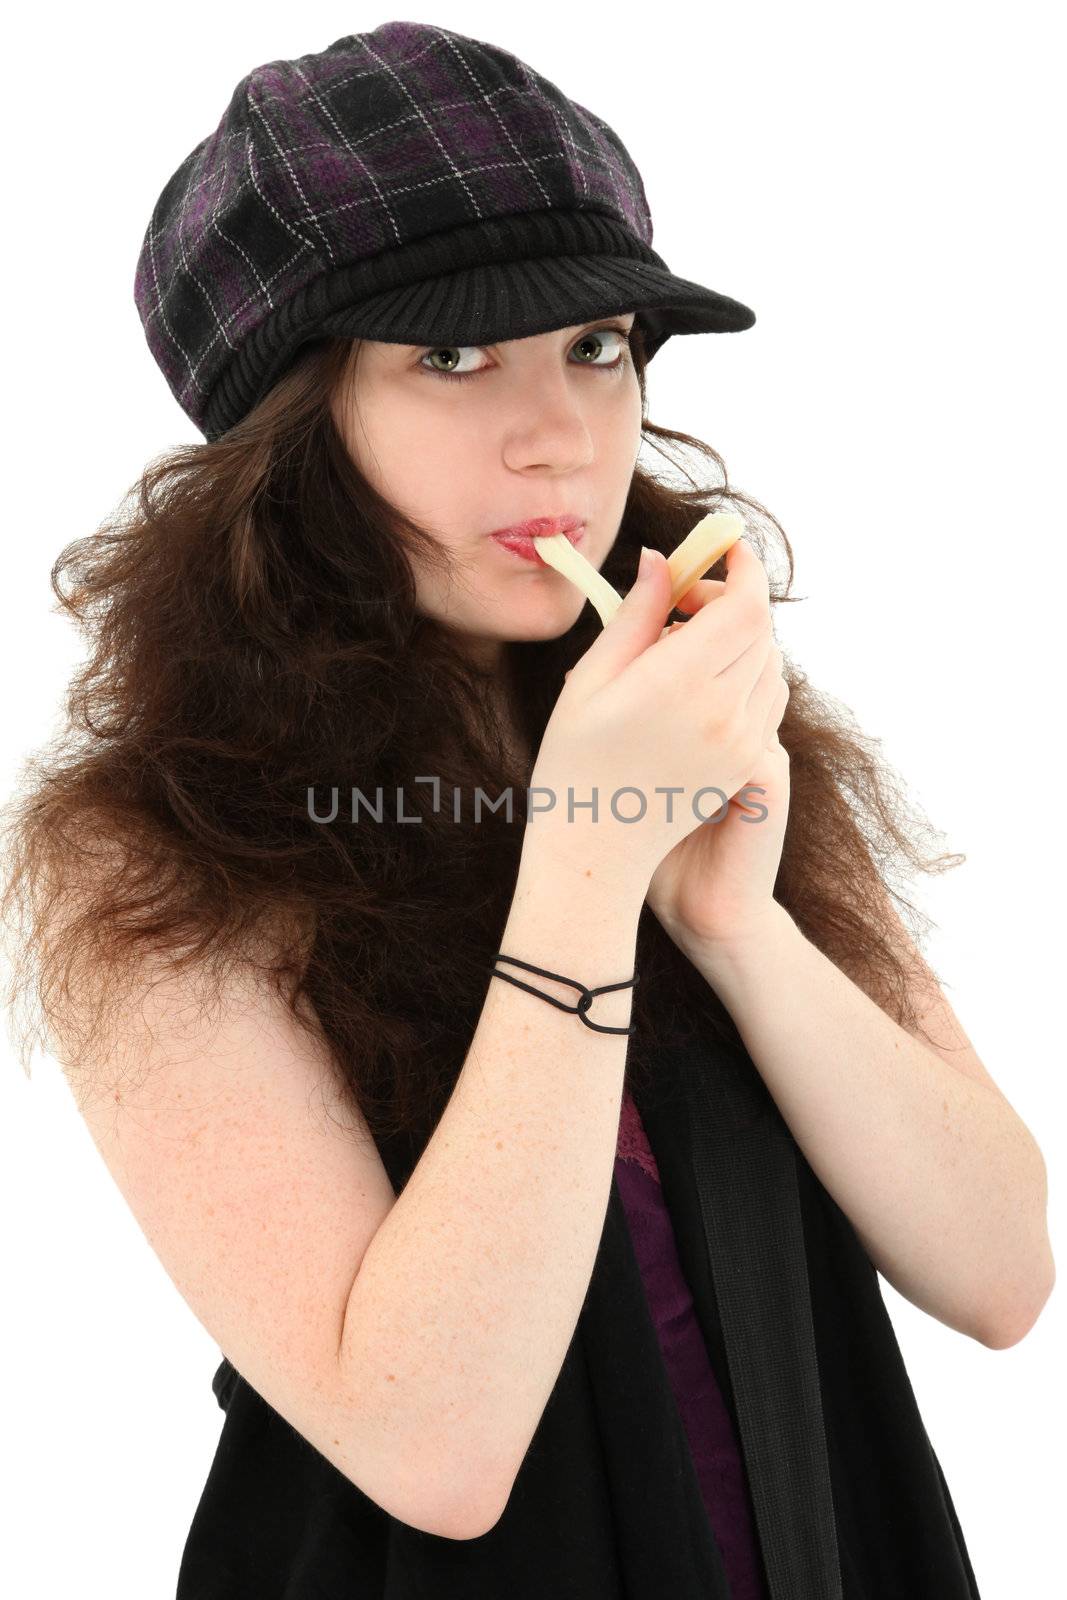 Attractive 18 year old girl in hat over white eating mozzarella  string cheese.